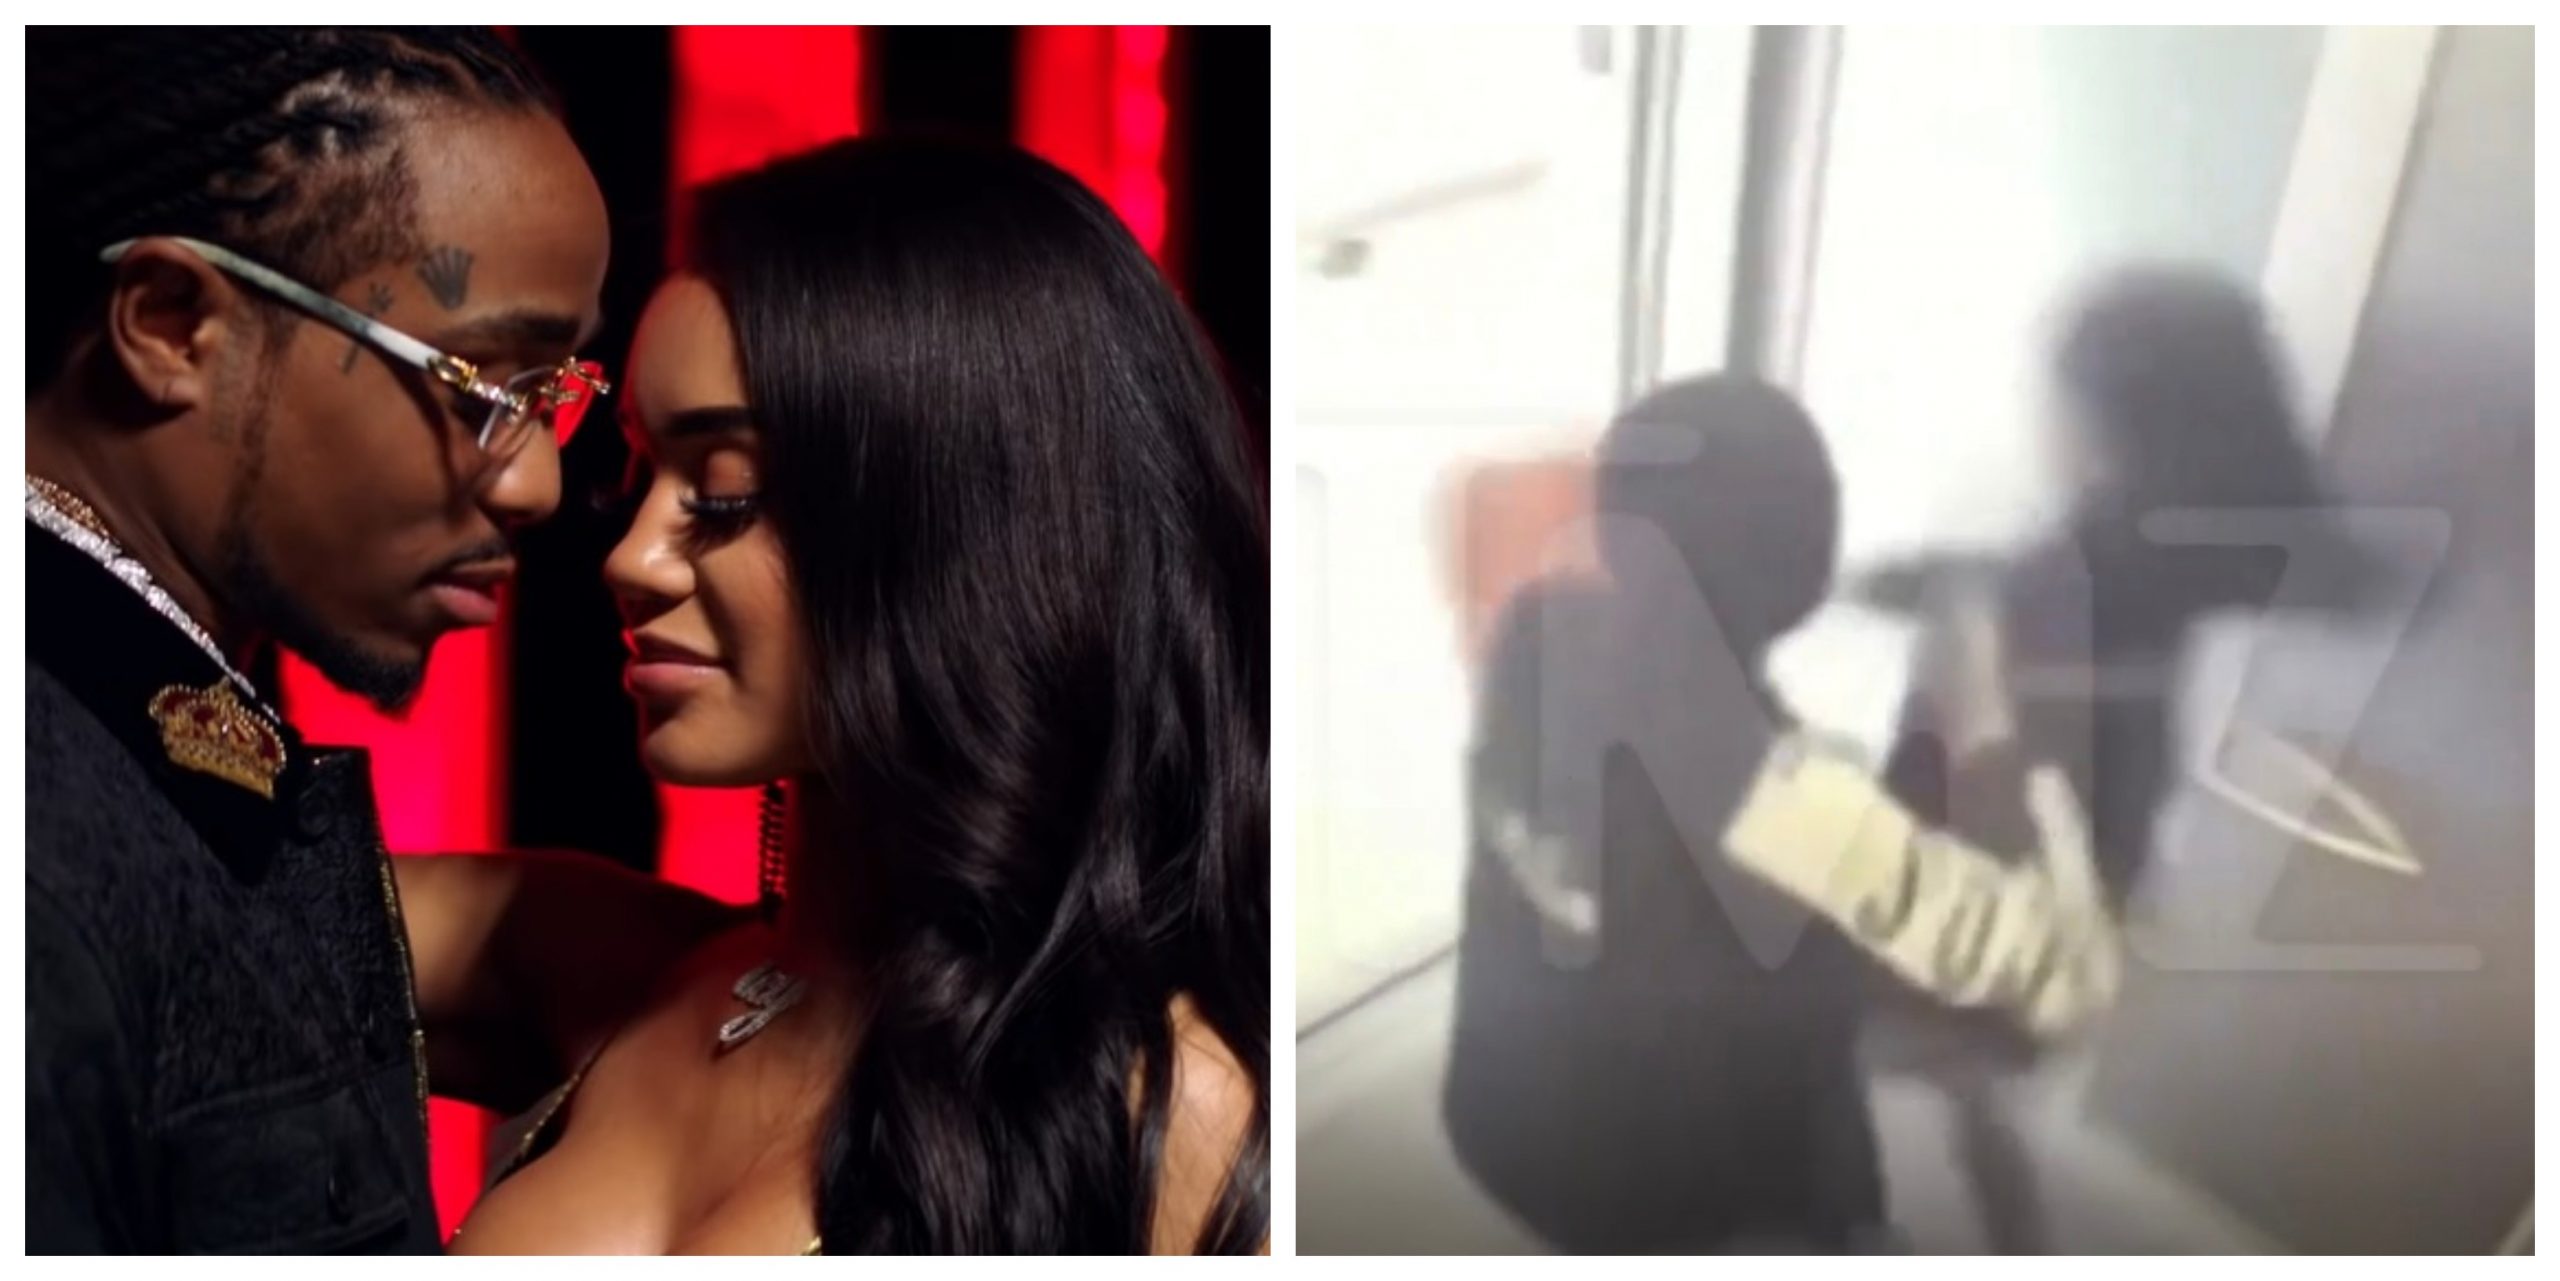 In news just in, a shocking video has surfaced of exes Saweetie and Quavo i...